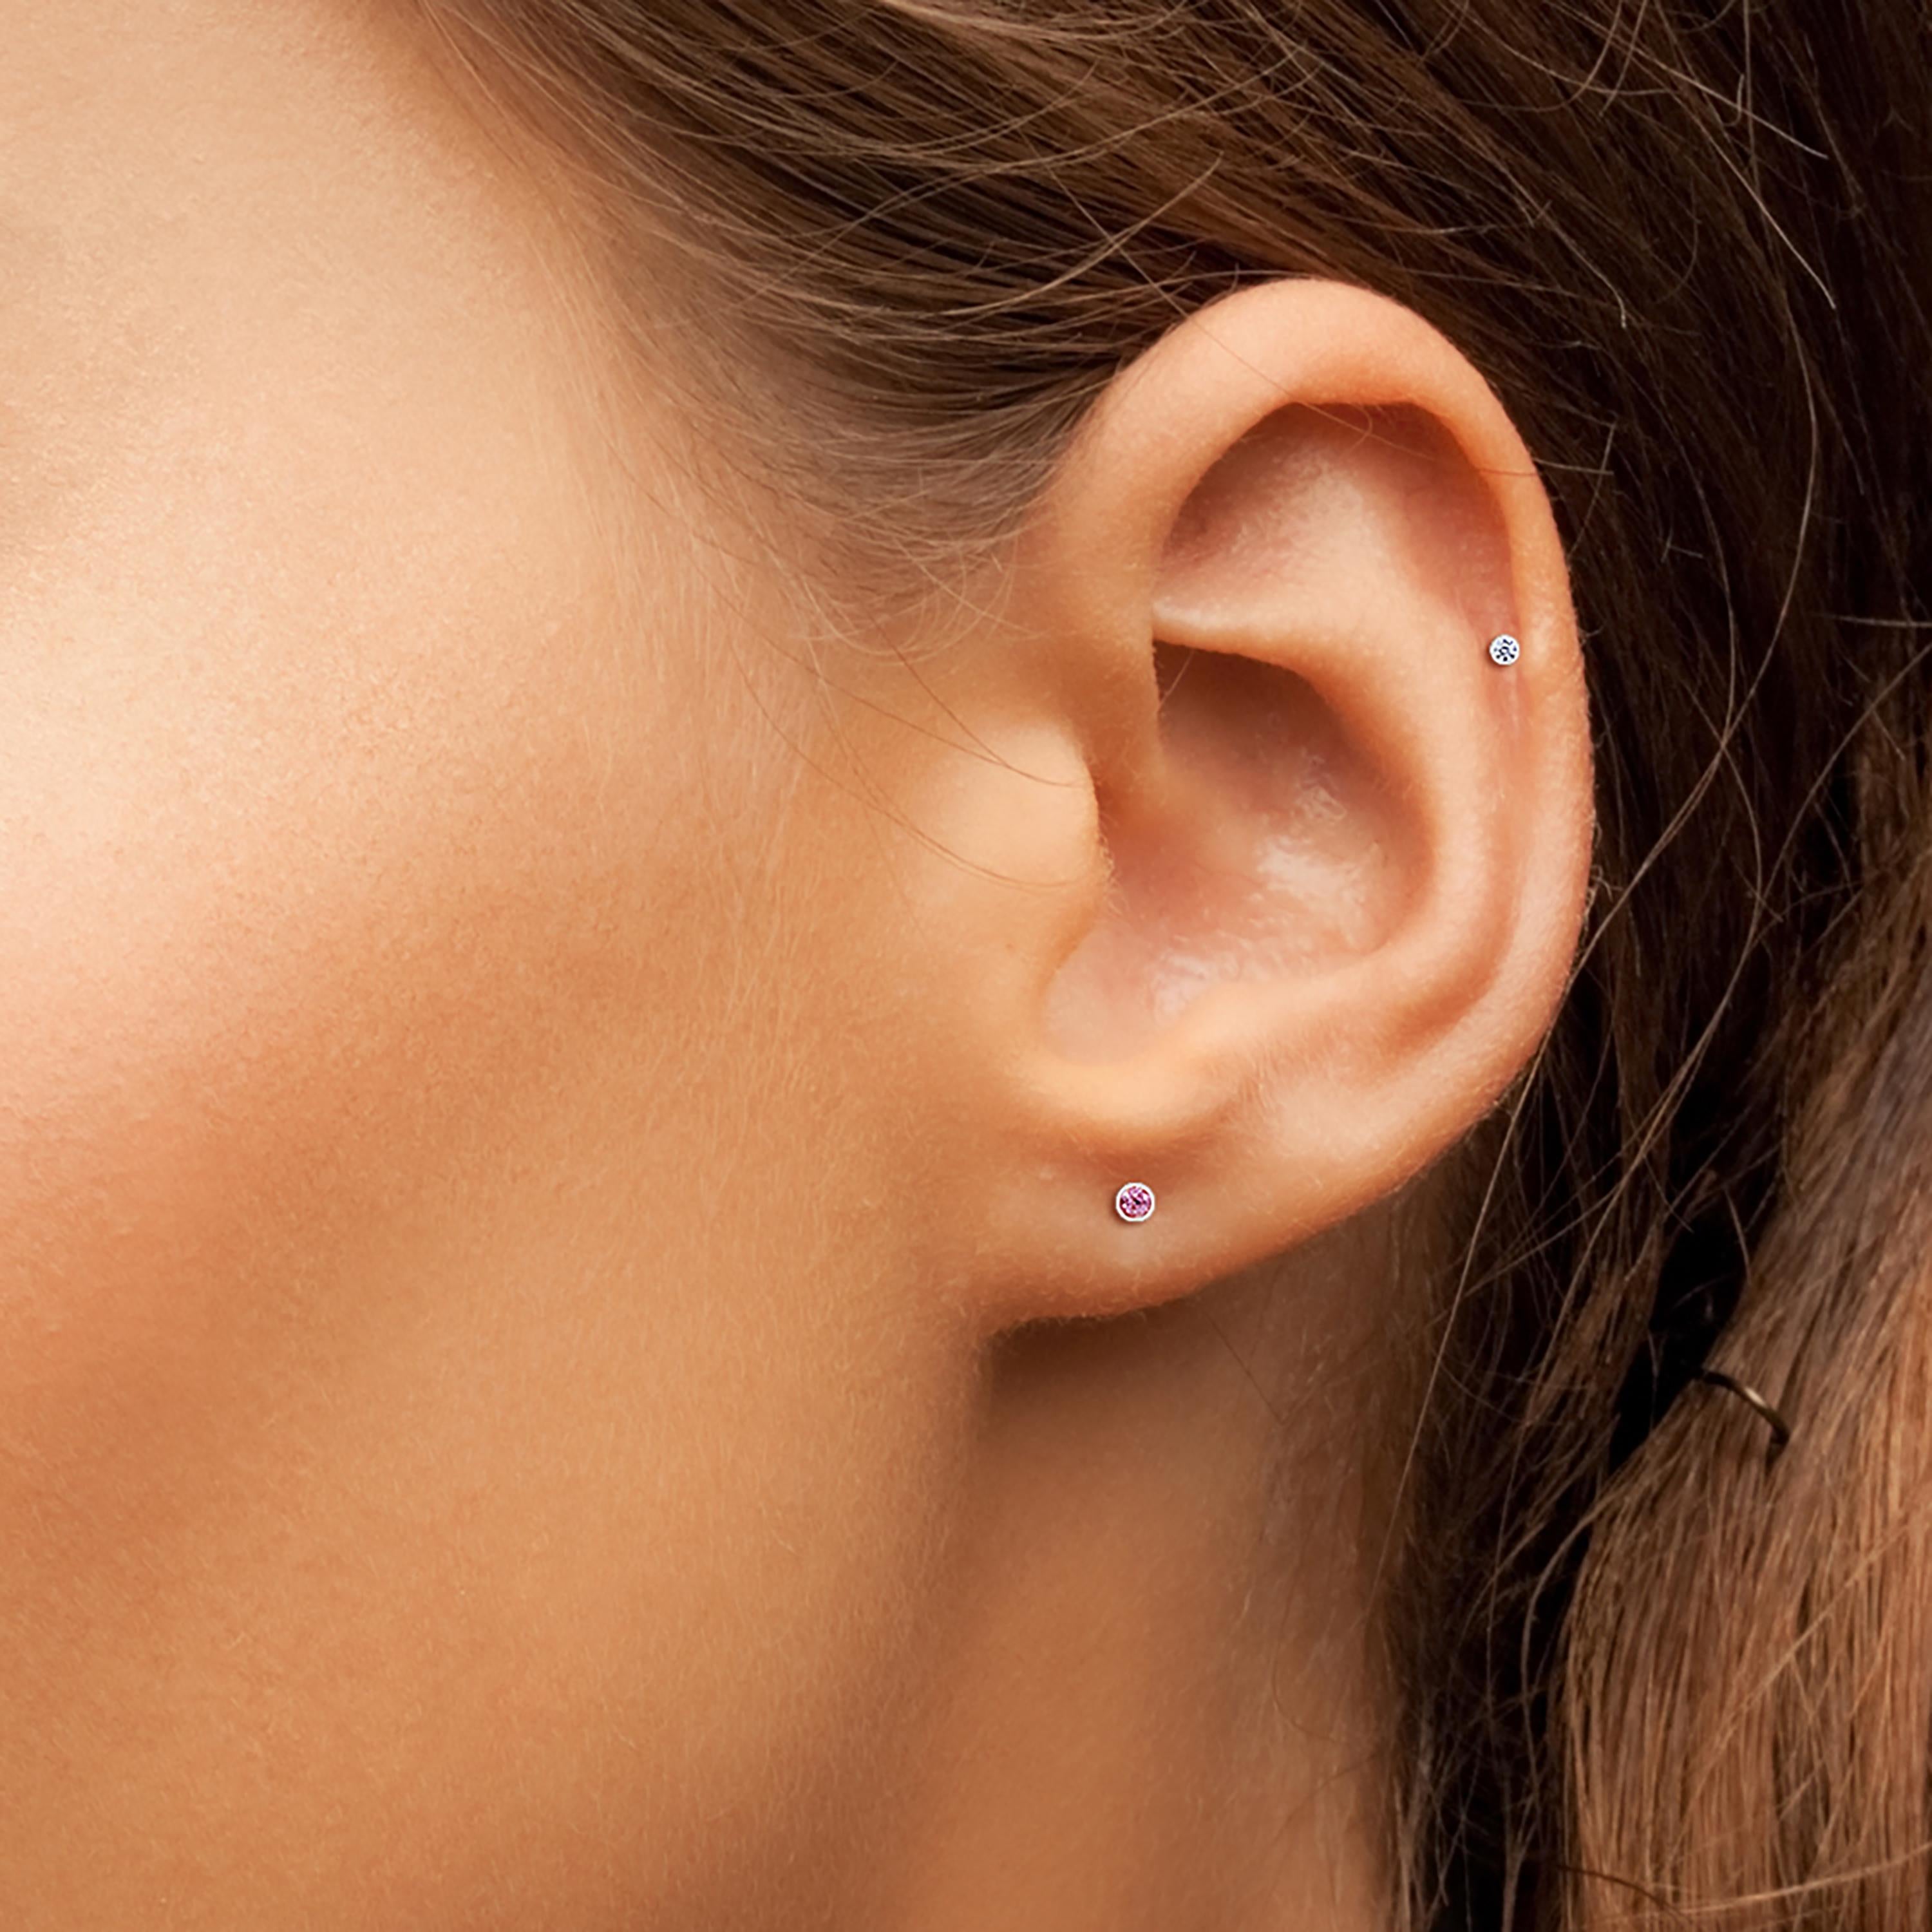 small stud earrings for third hole